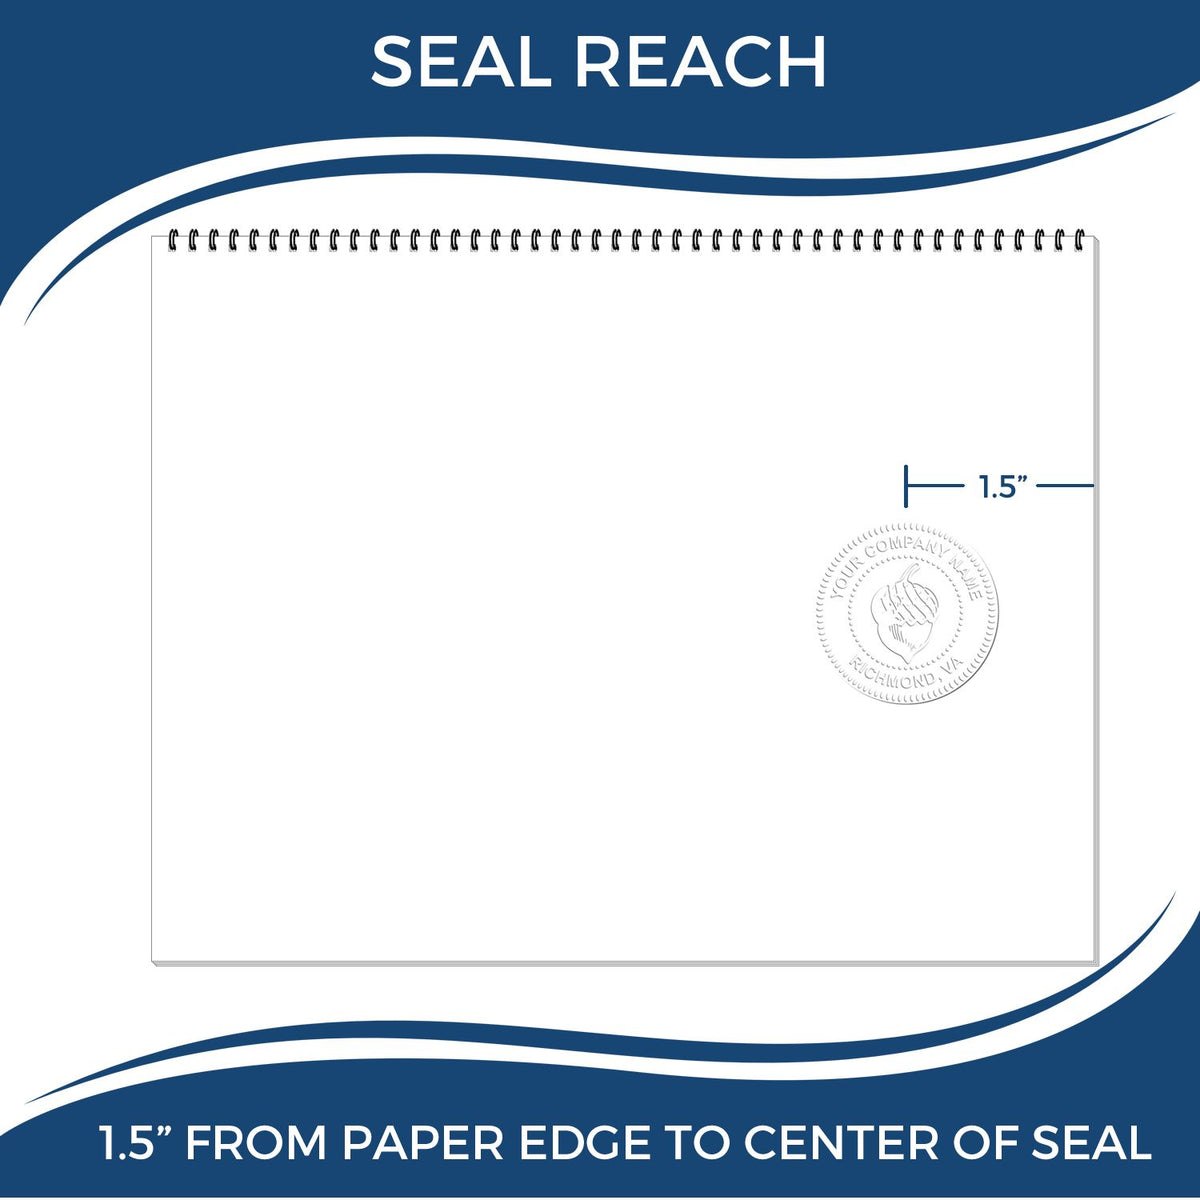 An infographic showing the seal reach which is represented by a ruler and a miniature seal image of the State of Rhode Island Architectural Seal Embosser